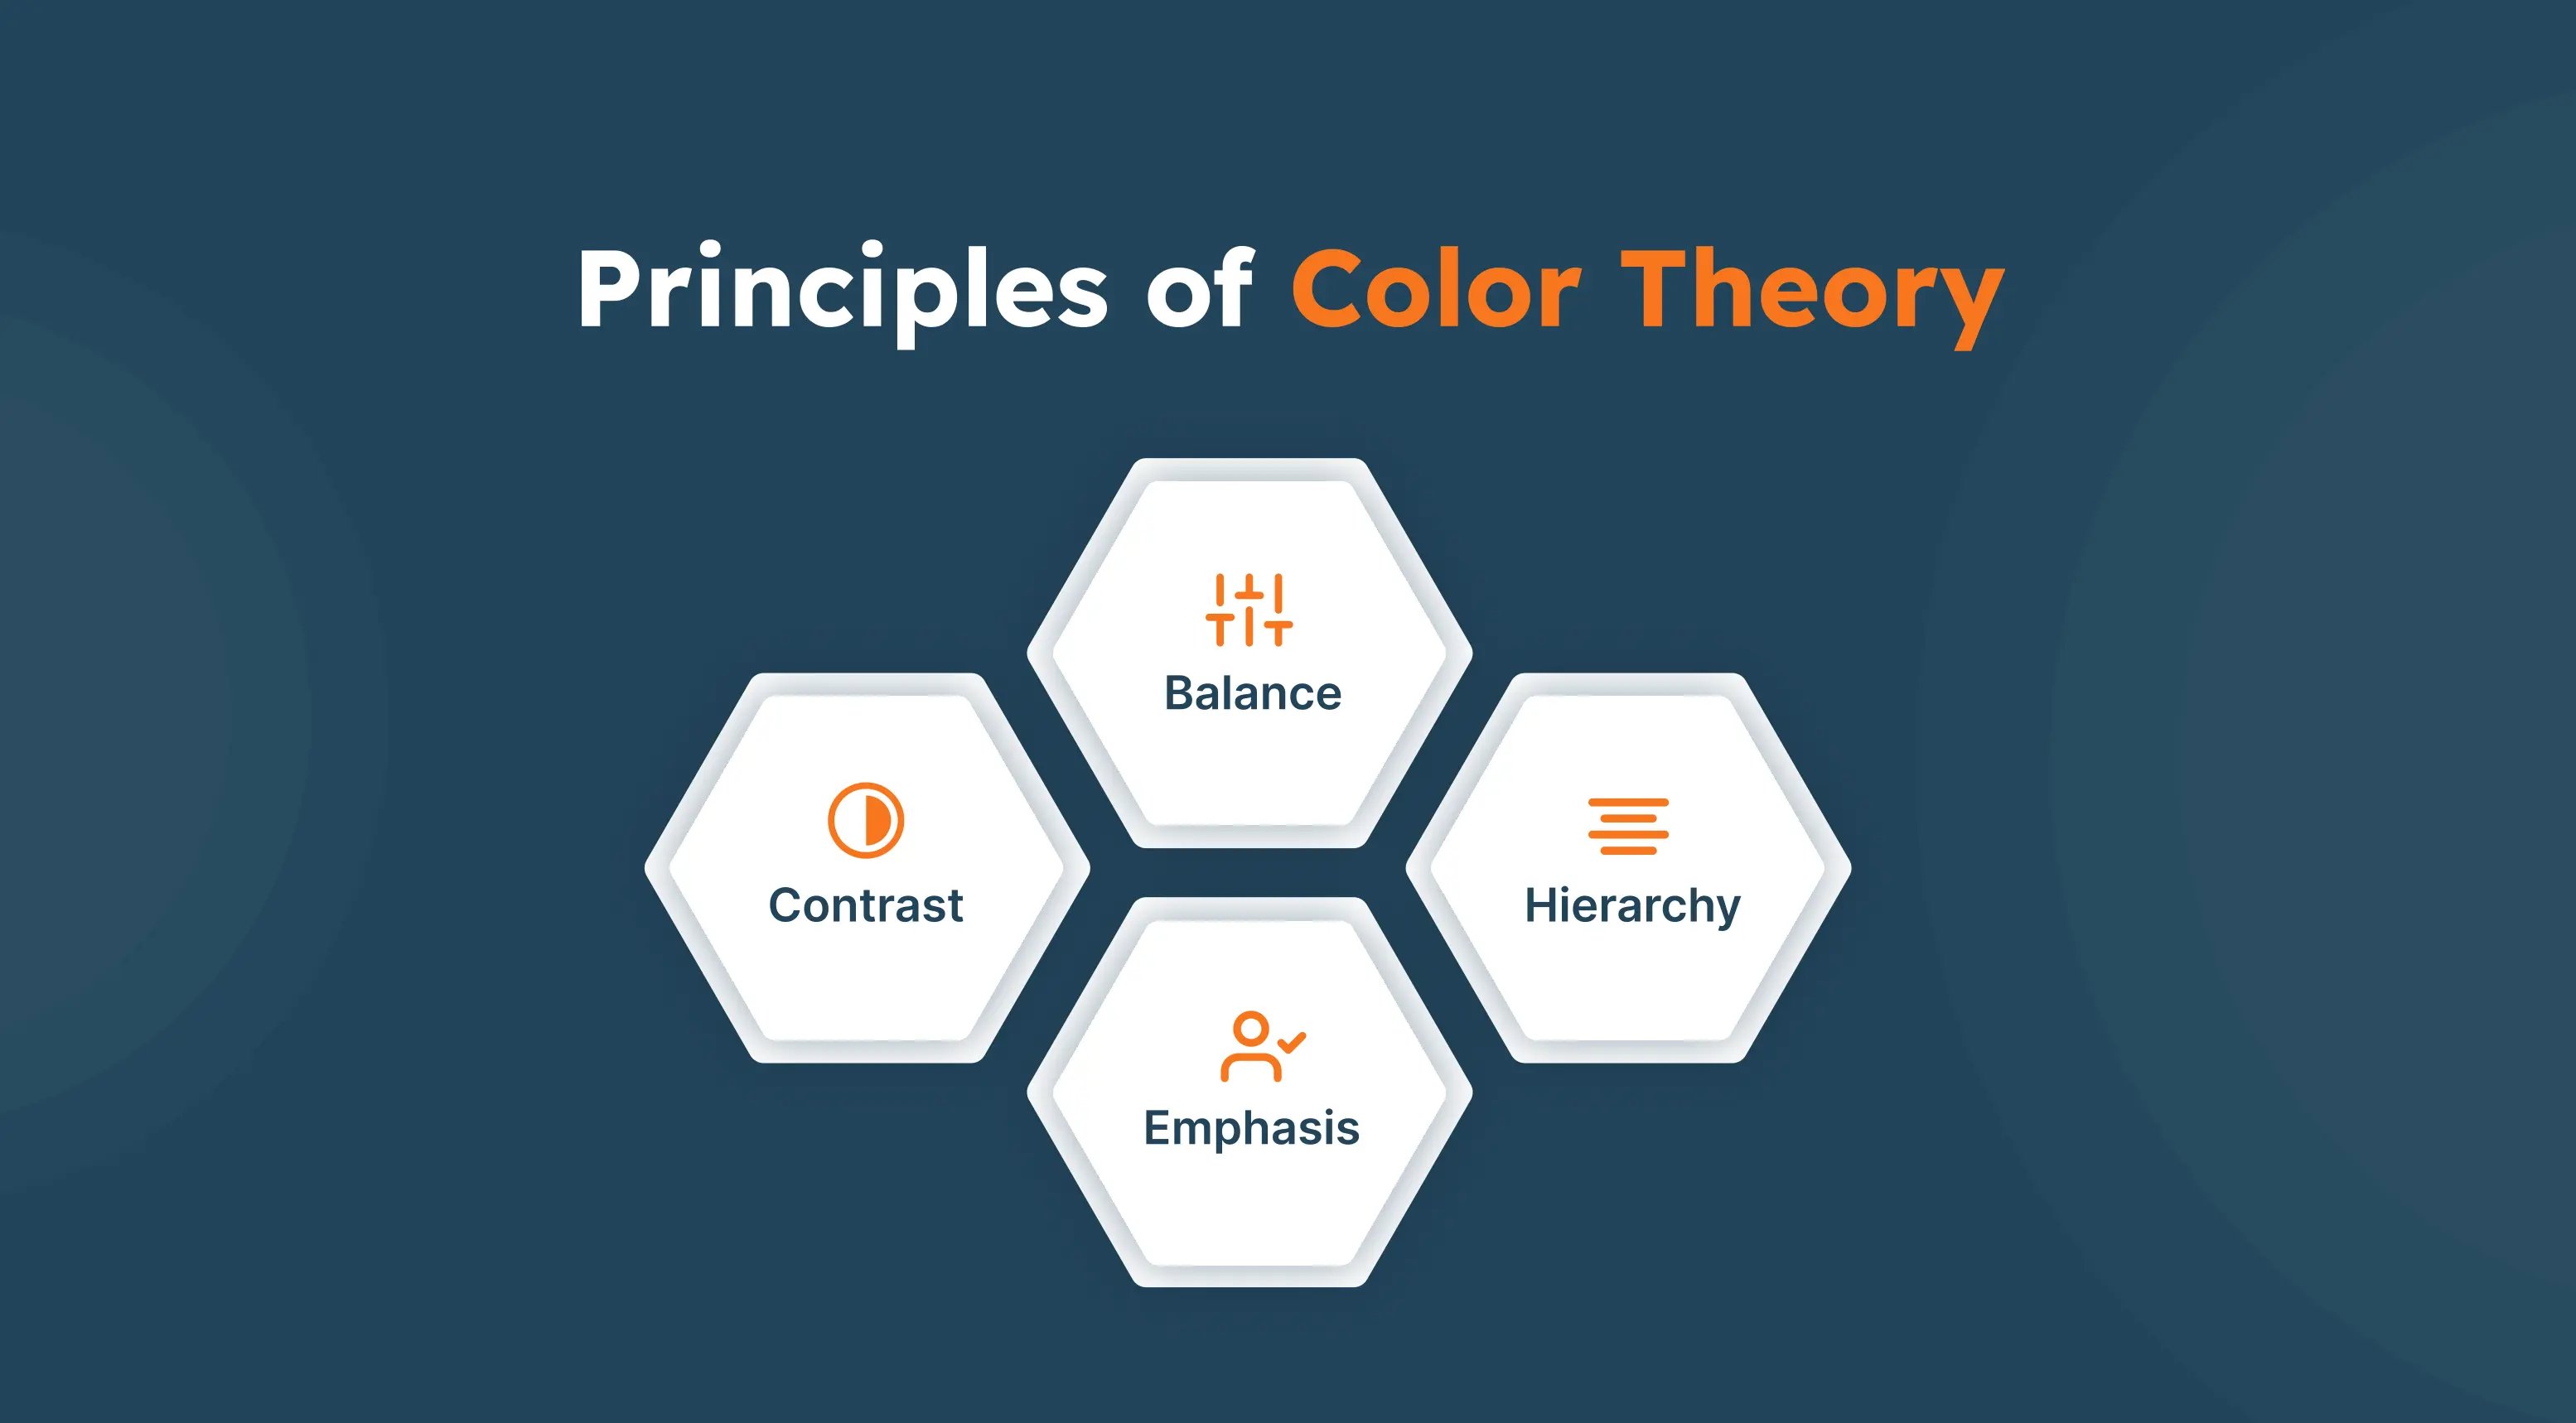 Principles of Color Theory